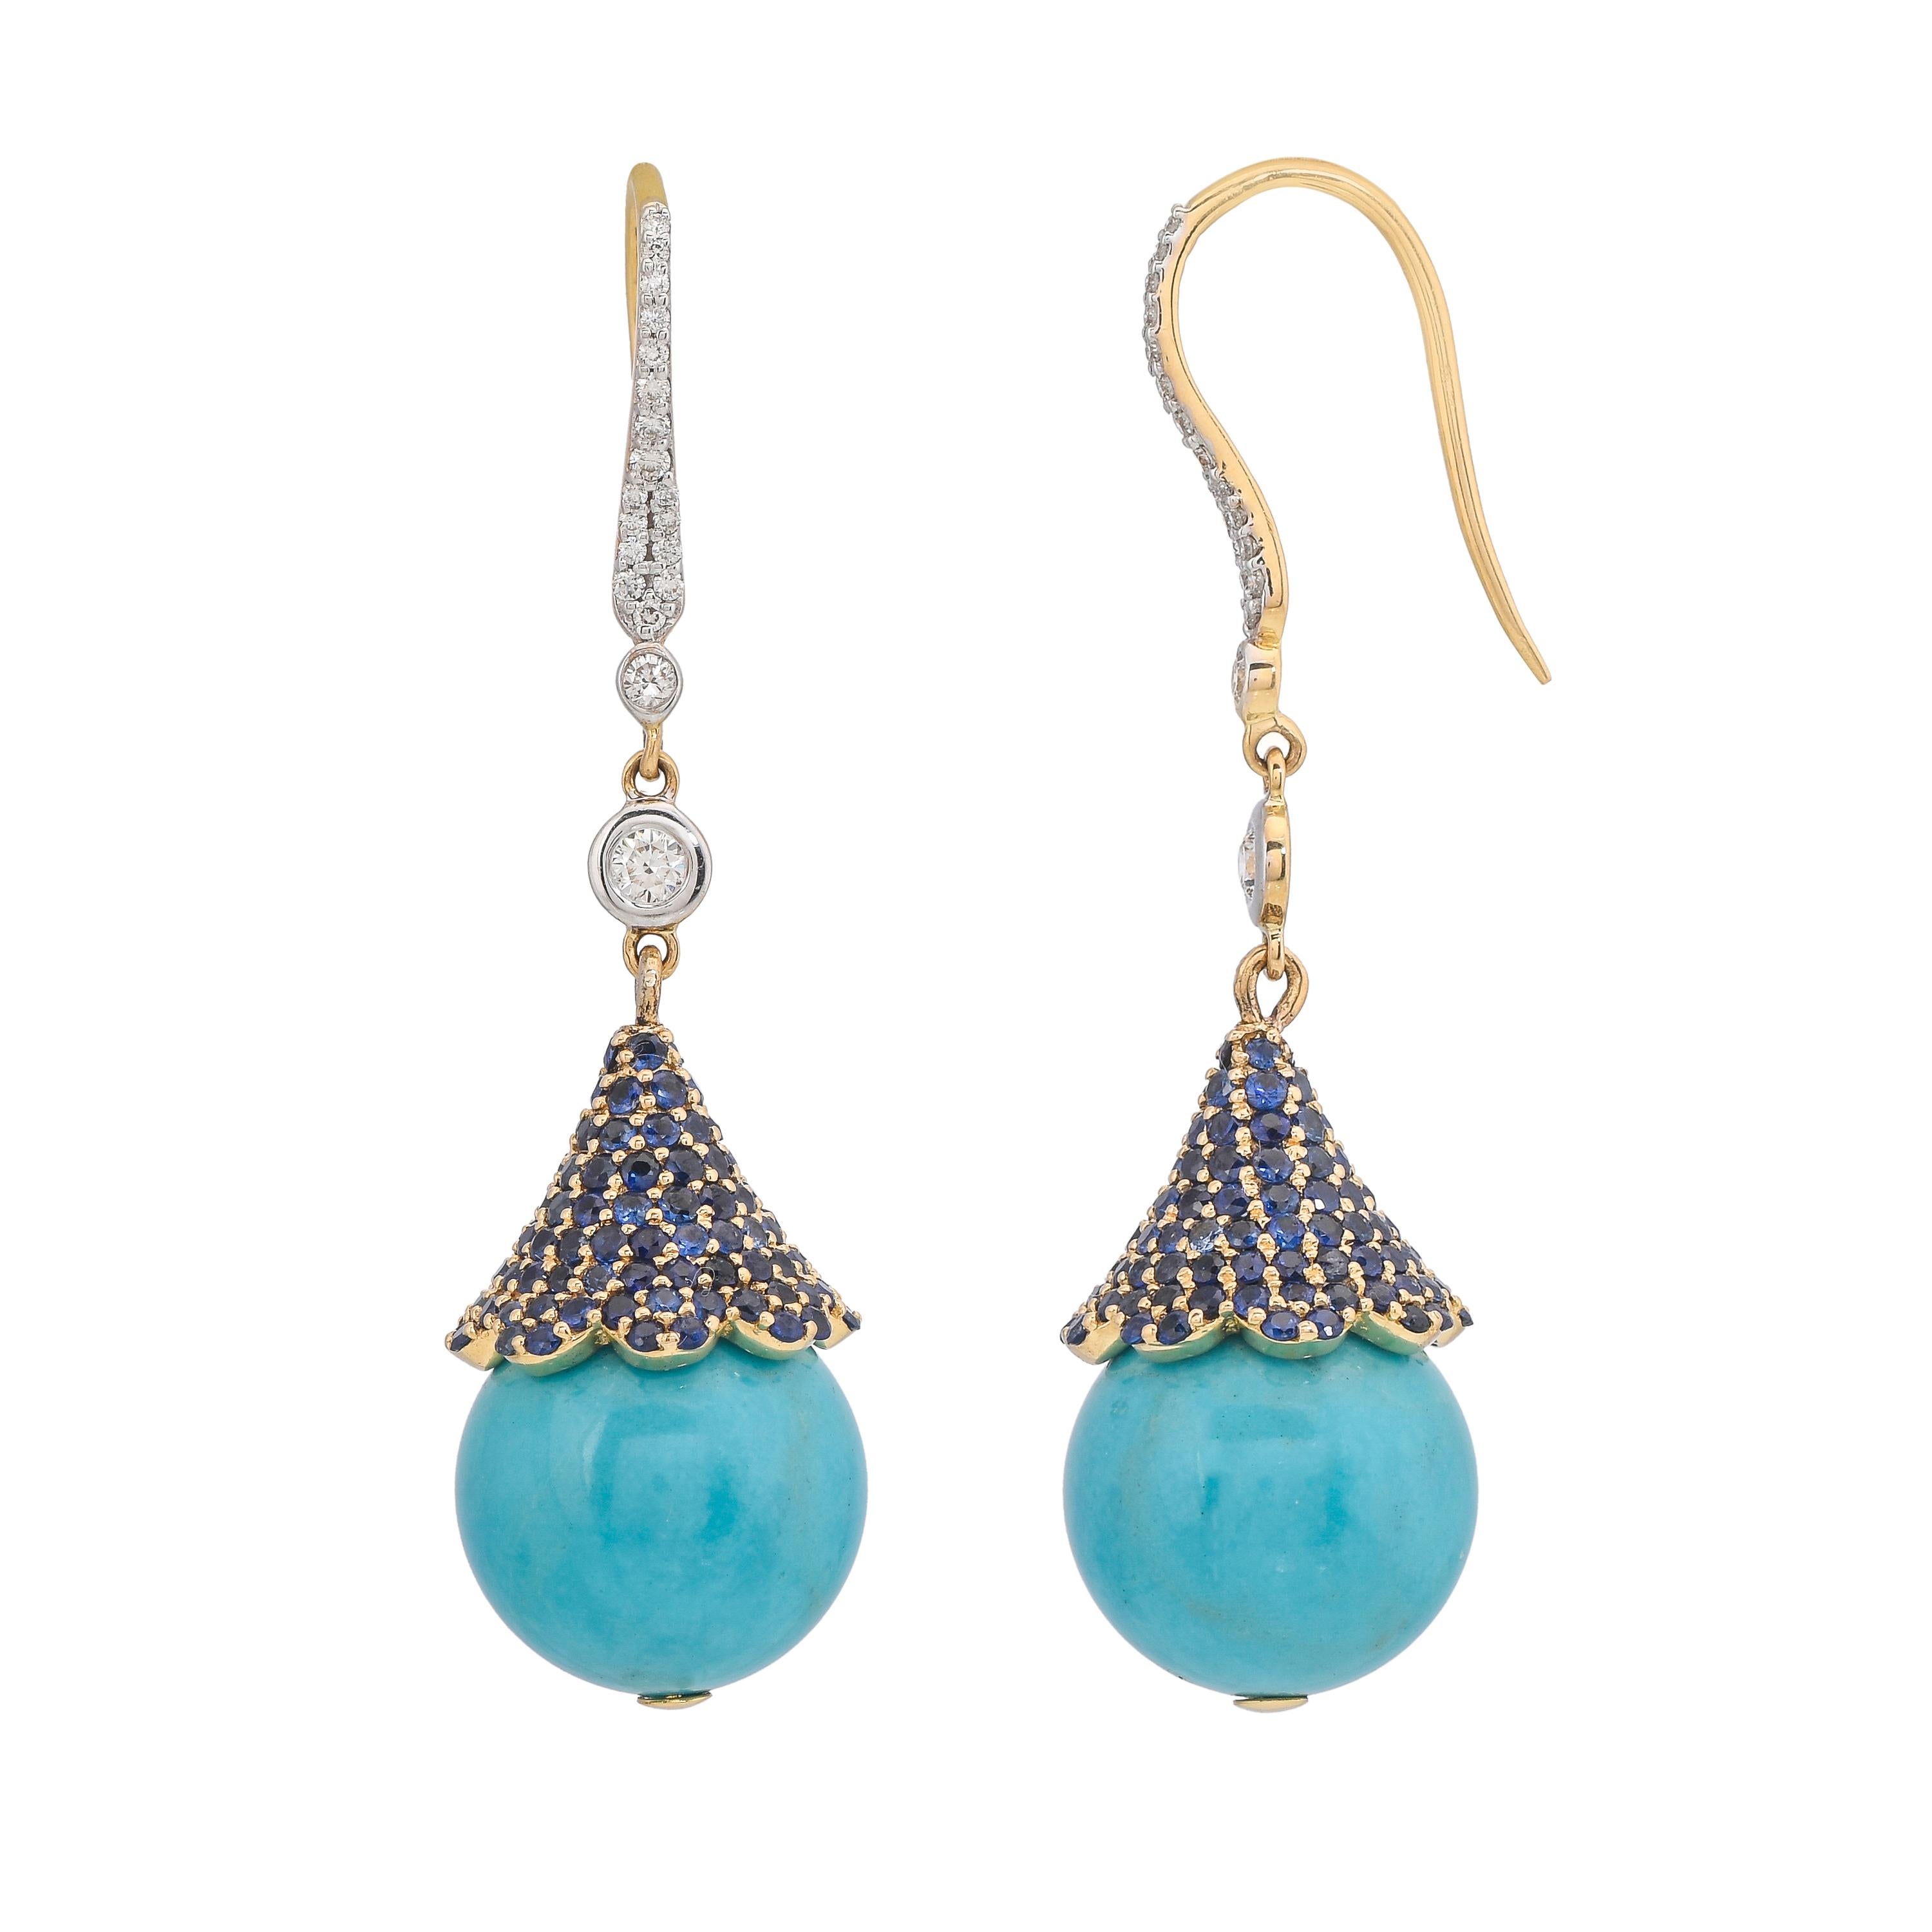 Each designed with a round shaped turquoise balls weighing approximately 30.10 carats in total with a blue sapphire-set cap weighing approximately 3.24 carats, further connected by 2 round shaped diamonds and suspending from diamond set hoop with a